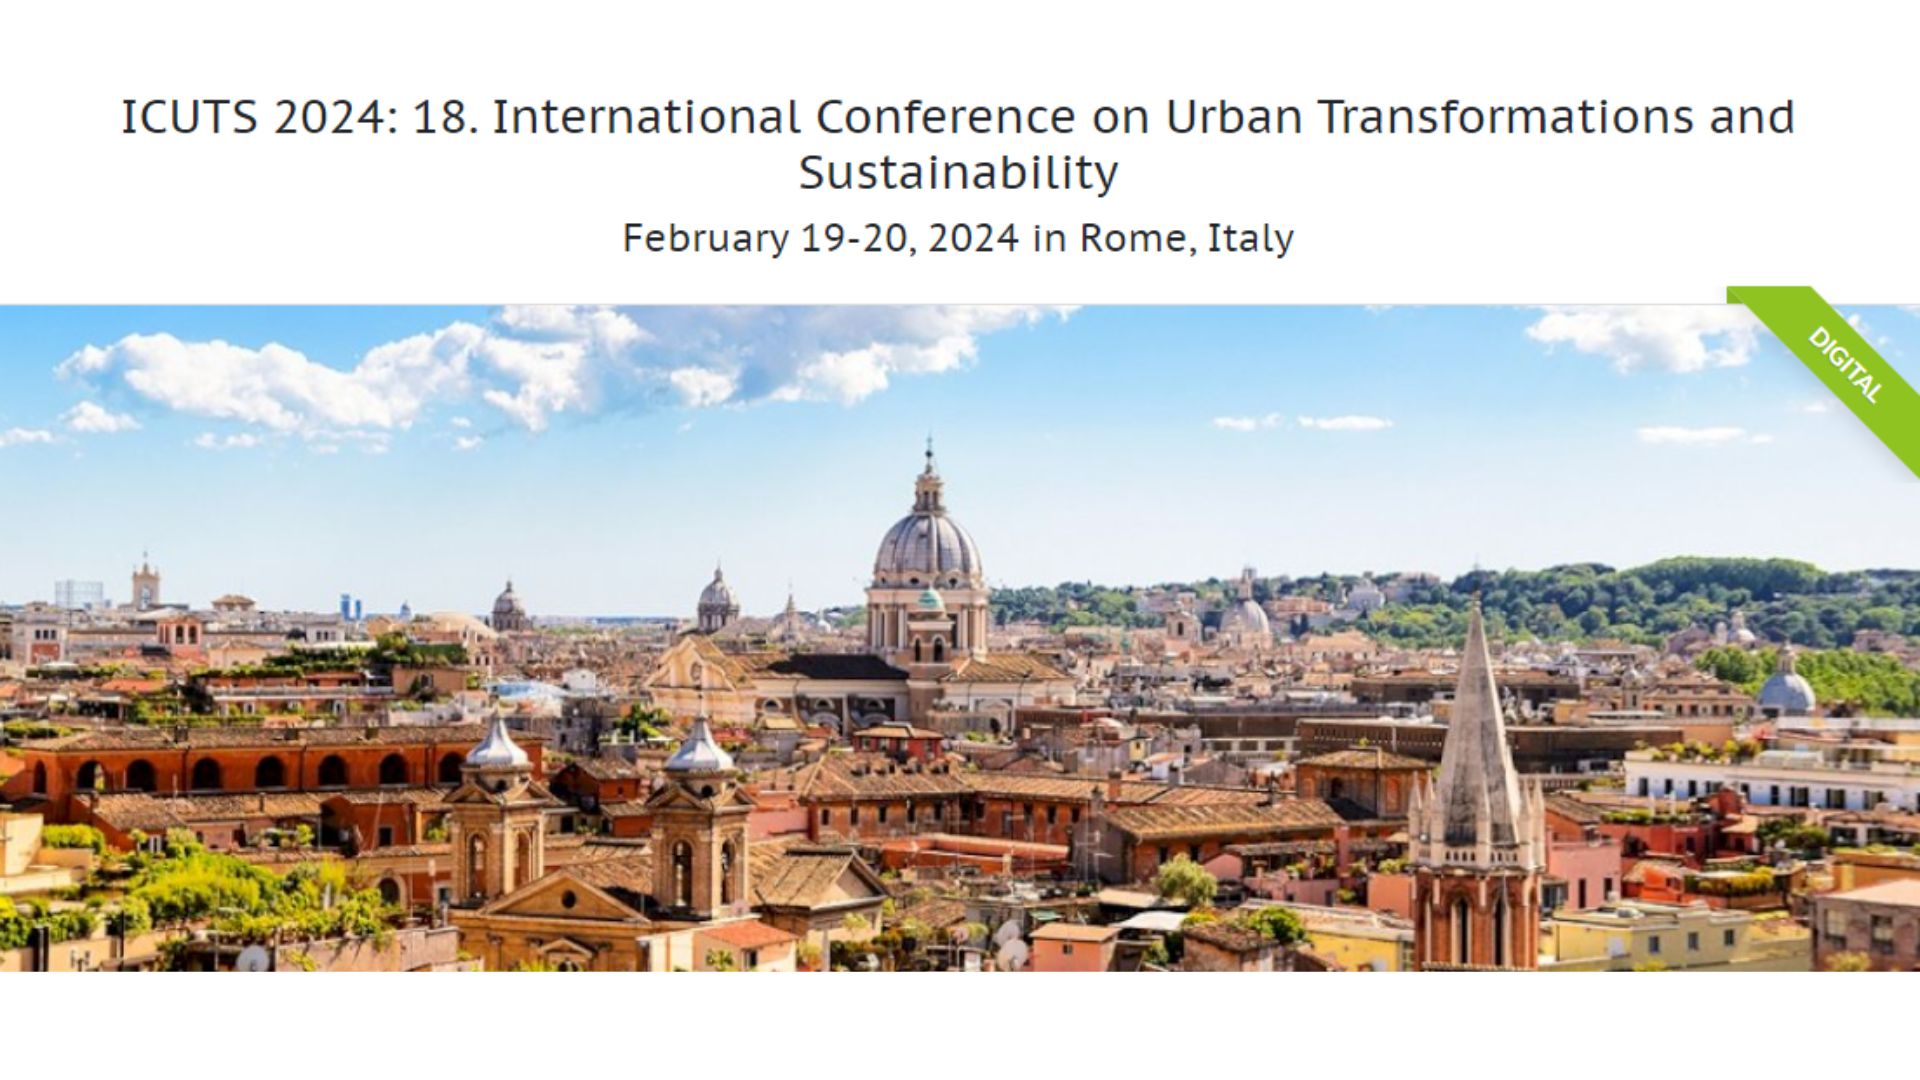 International Conference on Urban Transformations and Sustainability